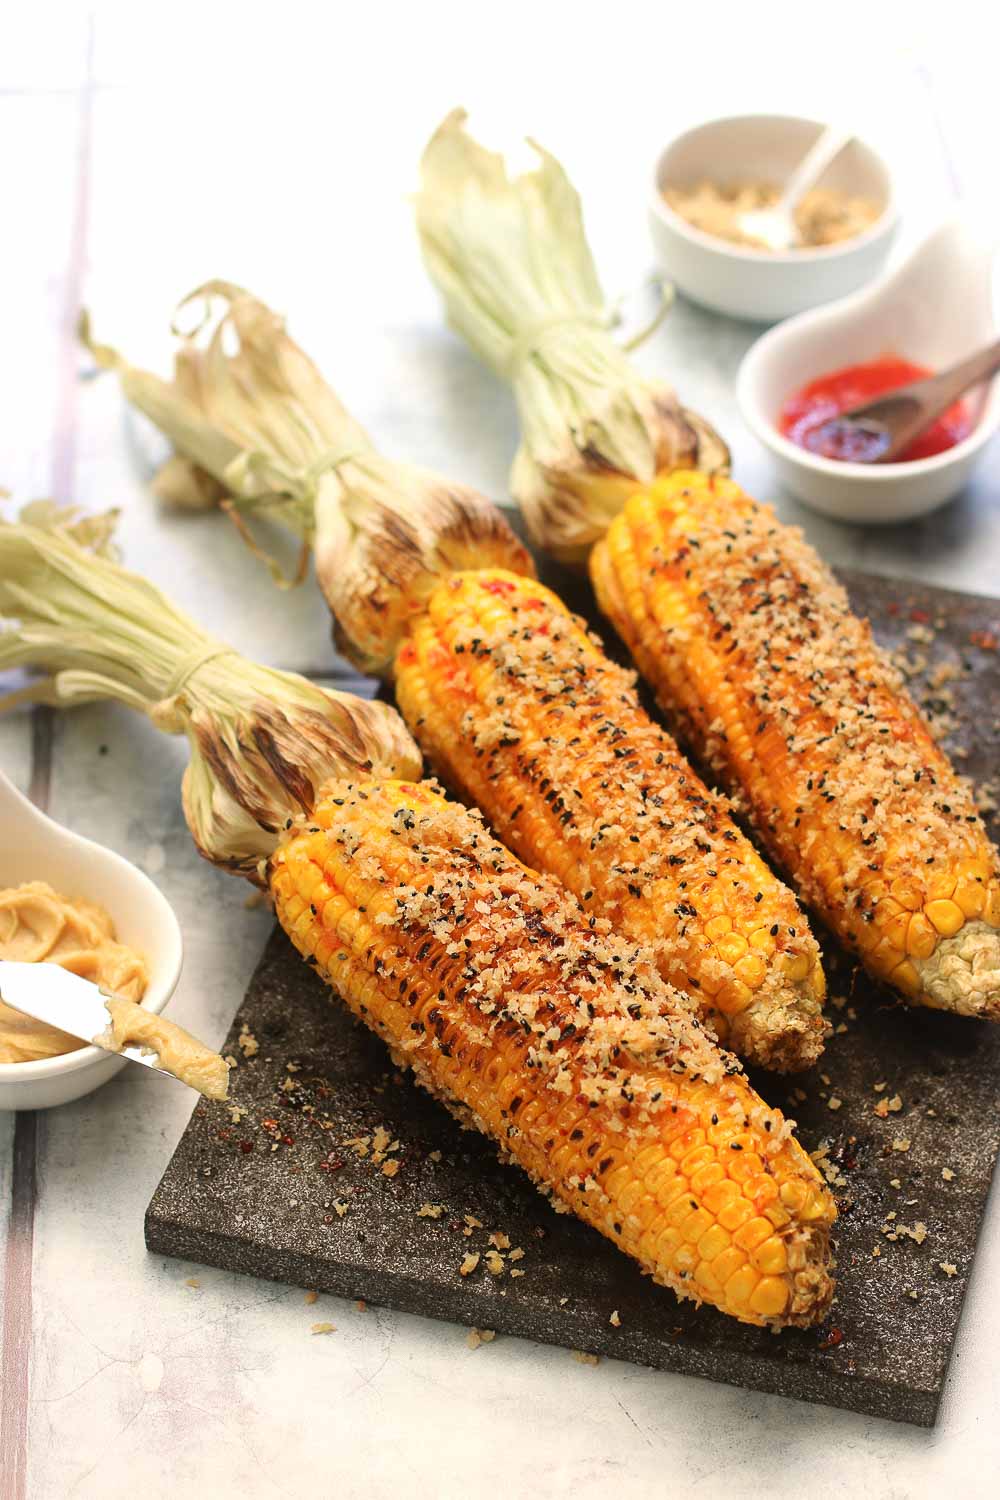 This grilled corn with spicy miso takes grilled corn to the next level and is one you’ll be making on repeat! It’s full of flavor, easy to make, and the perfect blend of spicy, savory, and umami. Perfect when paired with grilled chicken skewers or grilled mussels.